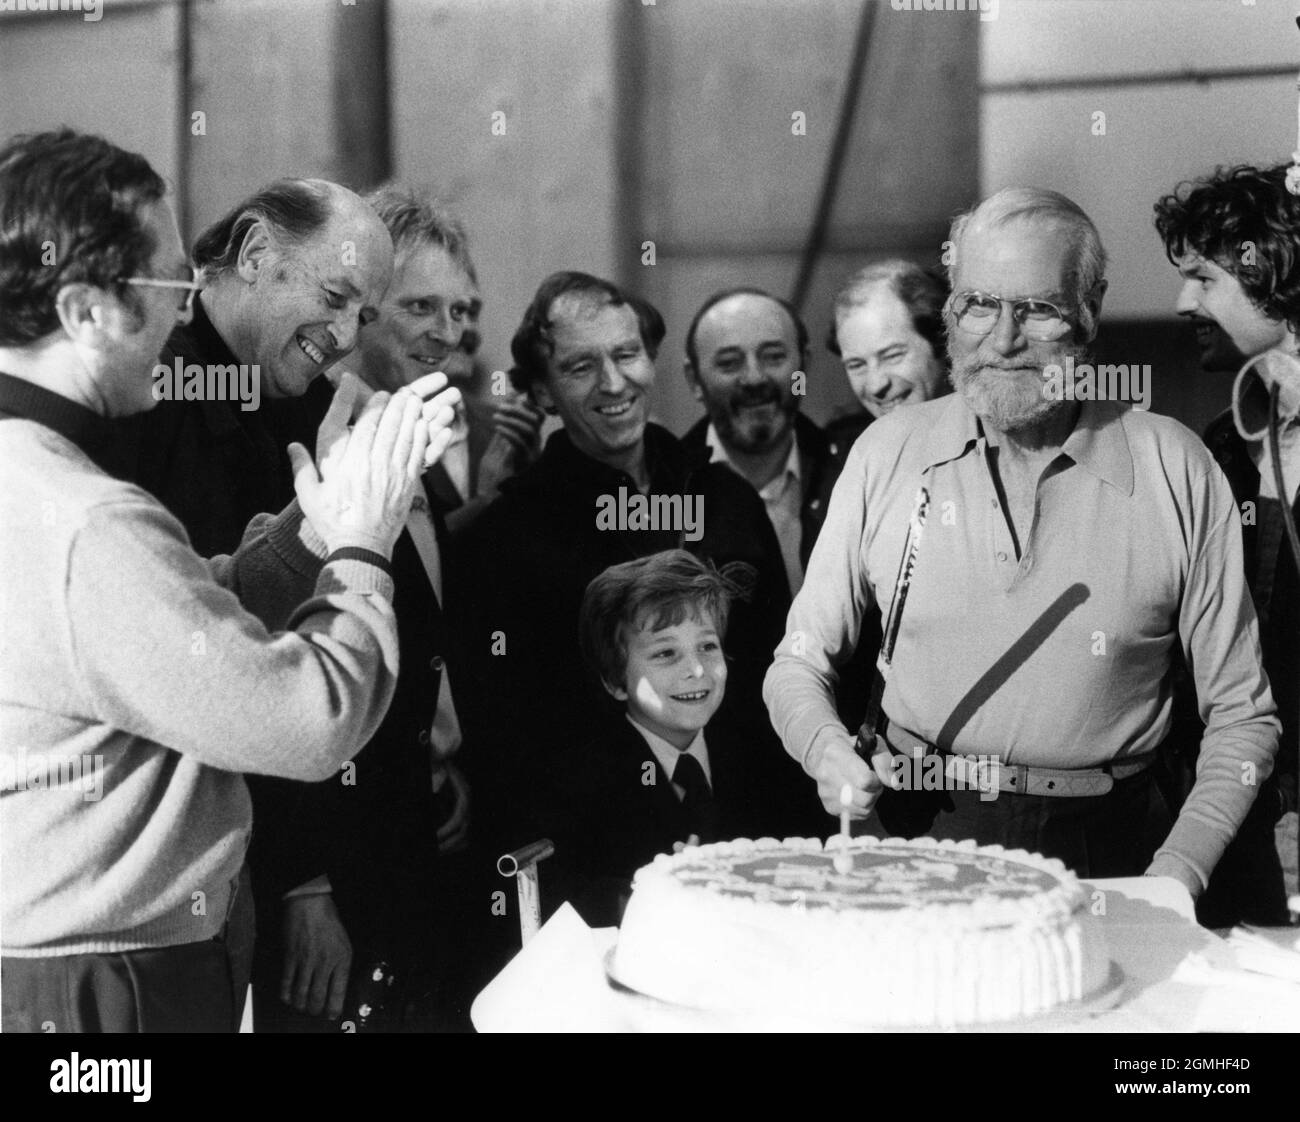 LAURENCE OLIVIER celebrates his 72nd Birthday on May 22nd 1979 with from left CHARLES H. SCHNEER RAY HARRYHAUSEN Director DESMOND DAVIS JAXON GWILLIM (son of actor Jack Gwillm) and HARRY HAMLIN on set candid during filming of CLASH OF THE TITANS 1981 director DESMOND DAVIS written by Beverley Cross costume design Emma Porteous creator of special visual effects (Dynamation) Ray Harryhausen music Laurence Rosenthal producers Charles H. Schneer and Ray Harryhausen Charles H. Schneer Productions / Peerford Ltd. / distribution Cinema International Corporation (CIC)  (UK) Metro Goldwyn Mayer (USA) Stock Photo